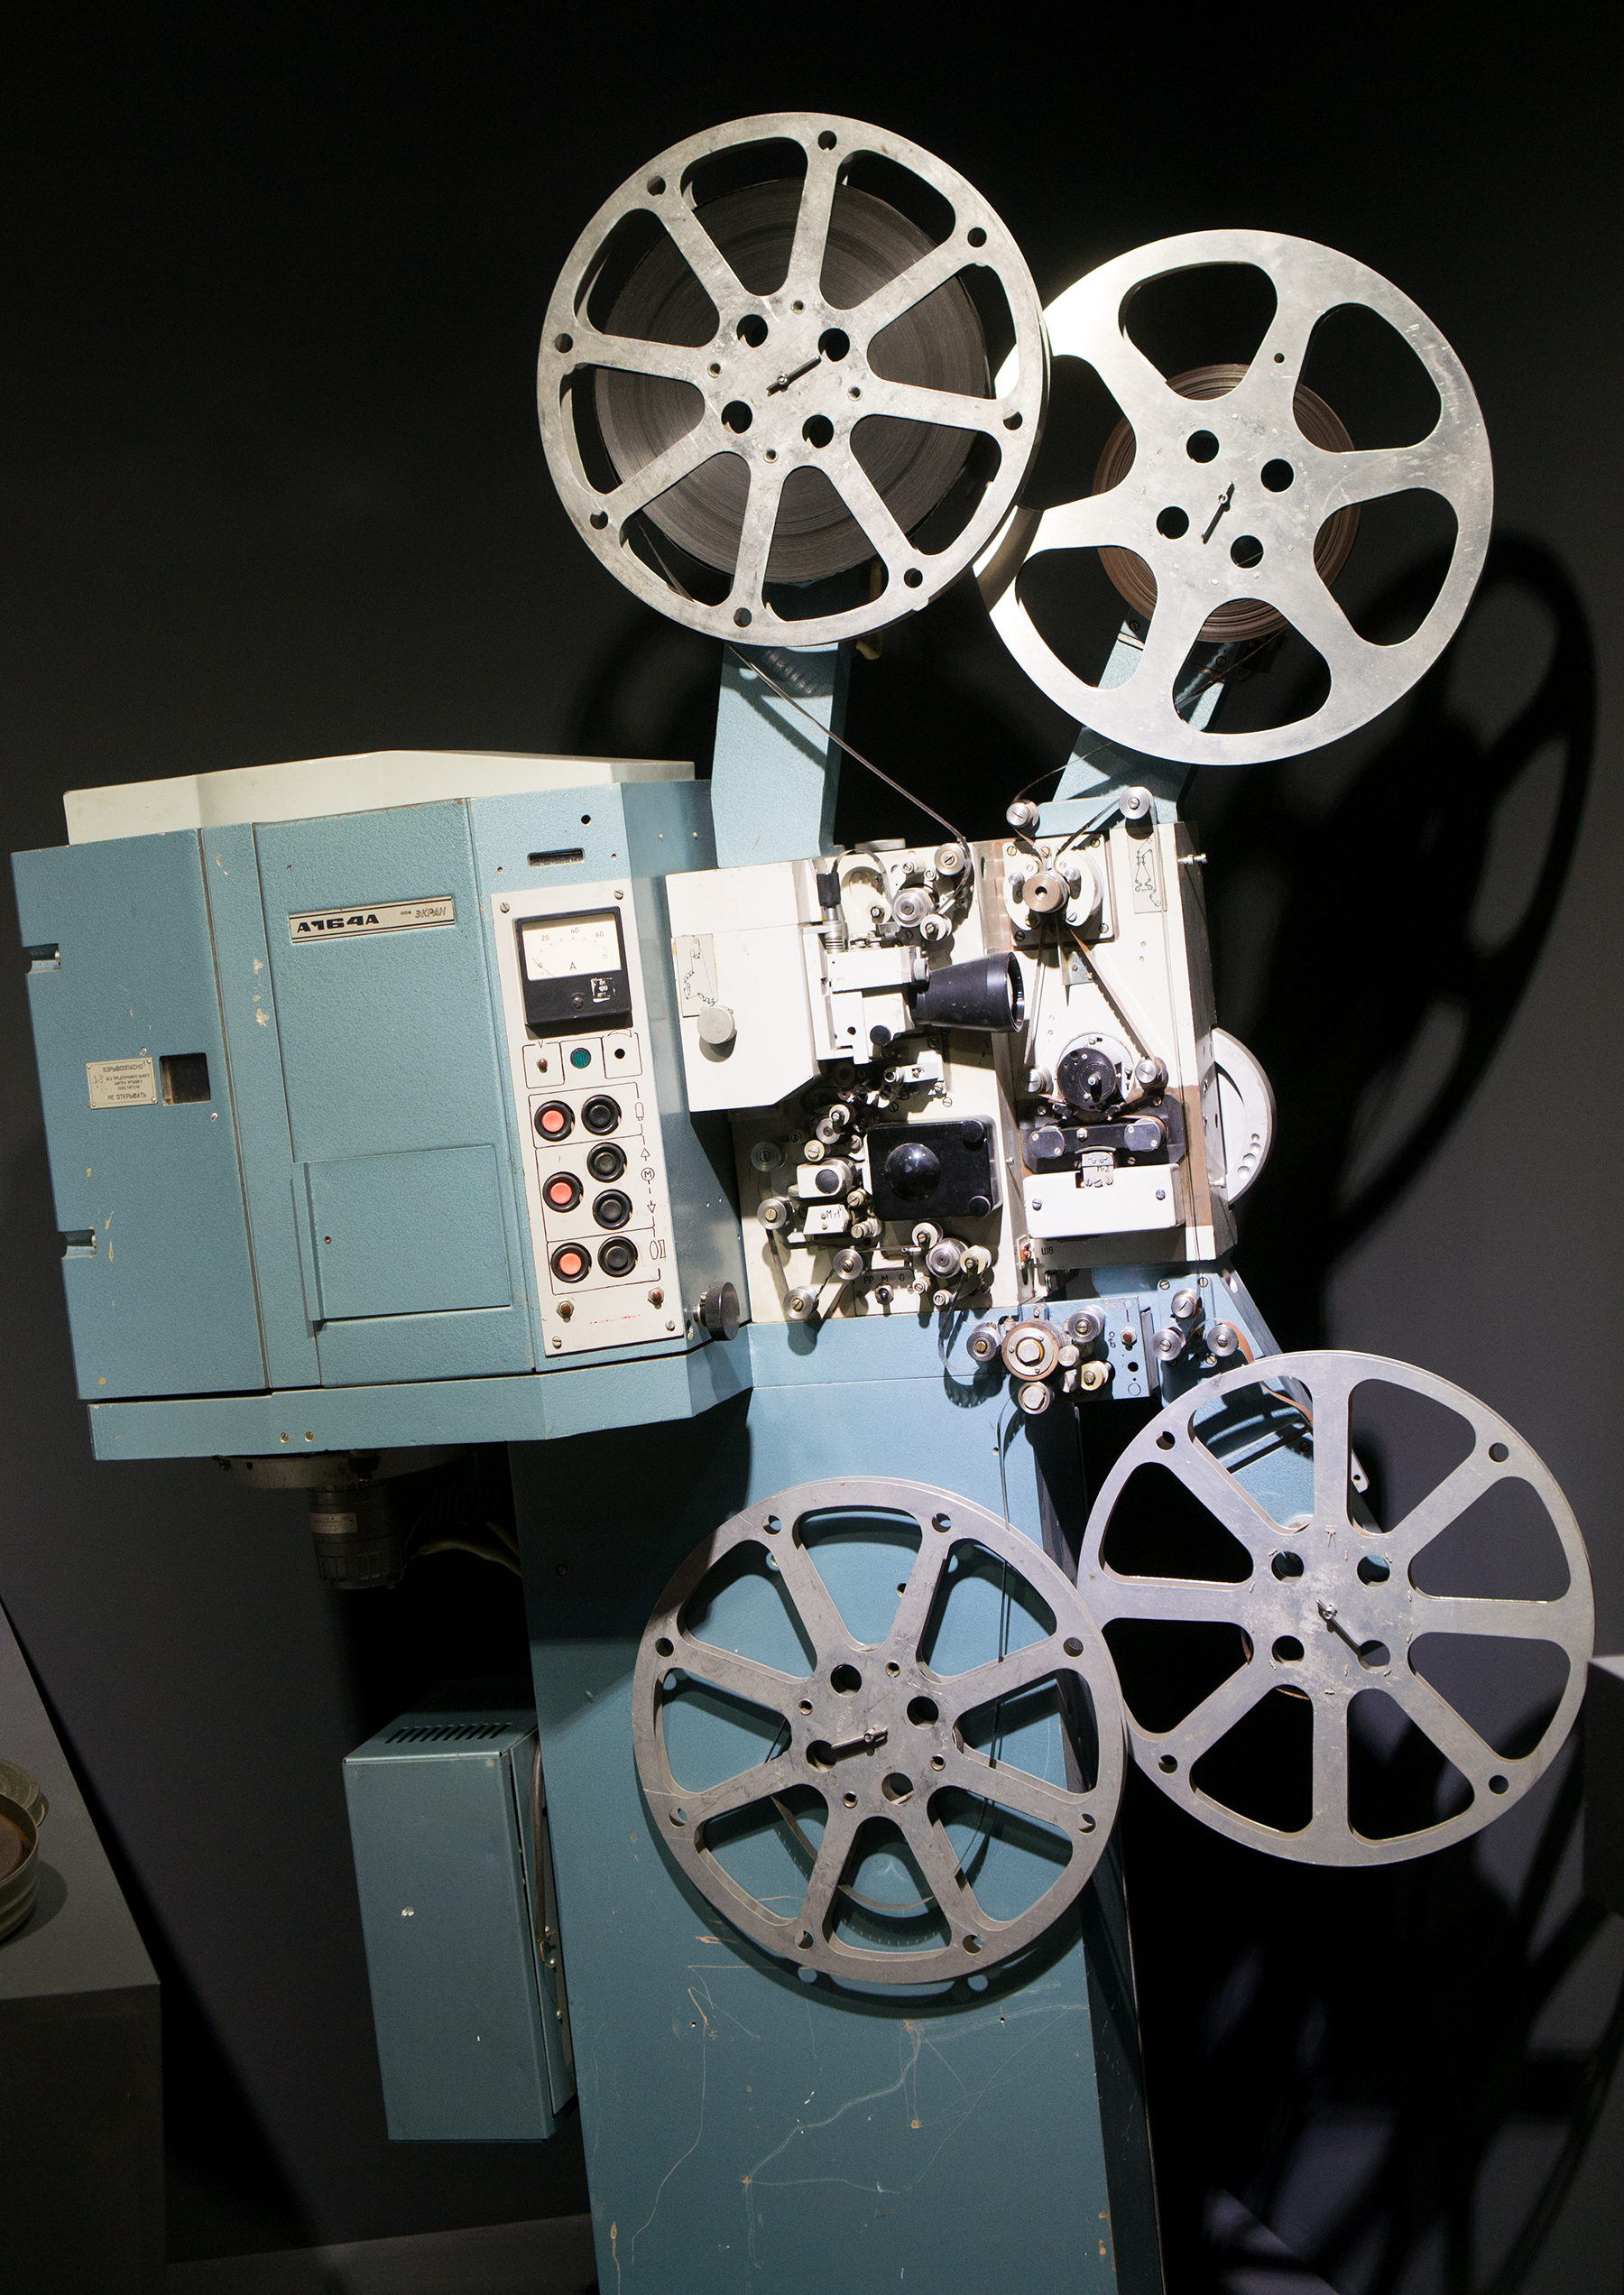 File:A164A movie projector.jpg - Wikimedia Commons